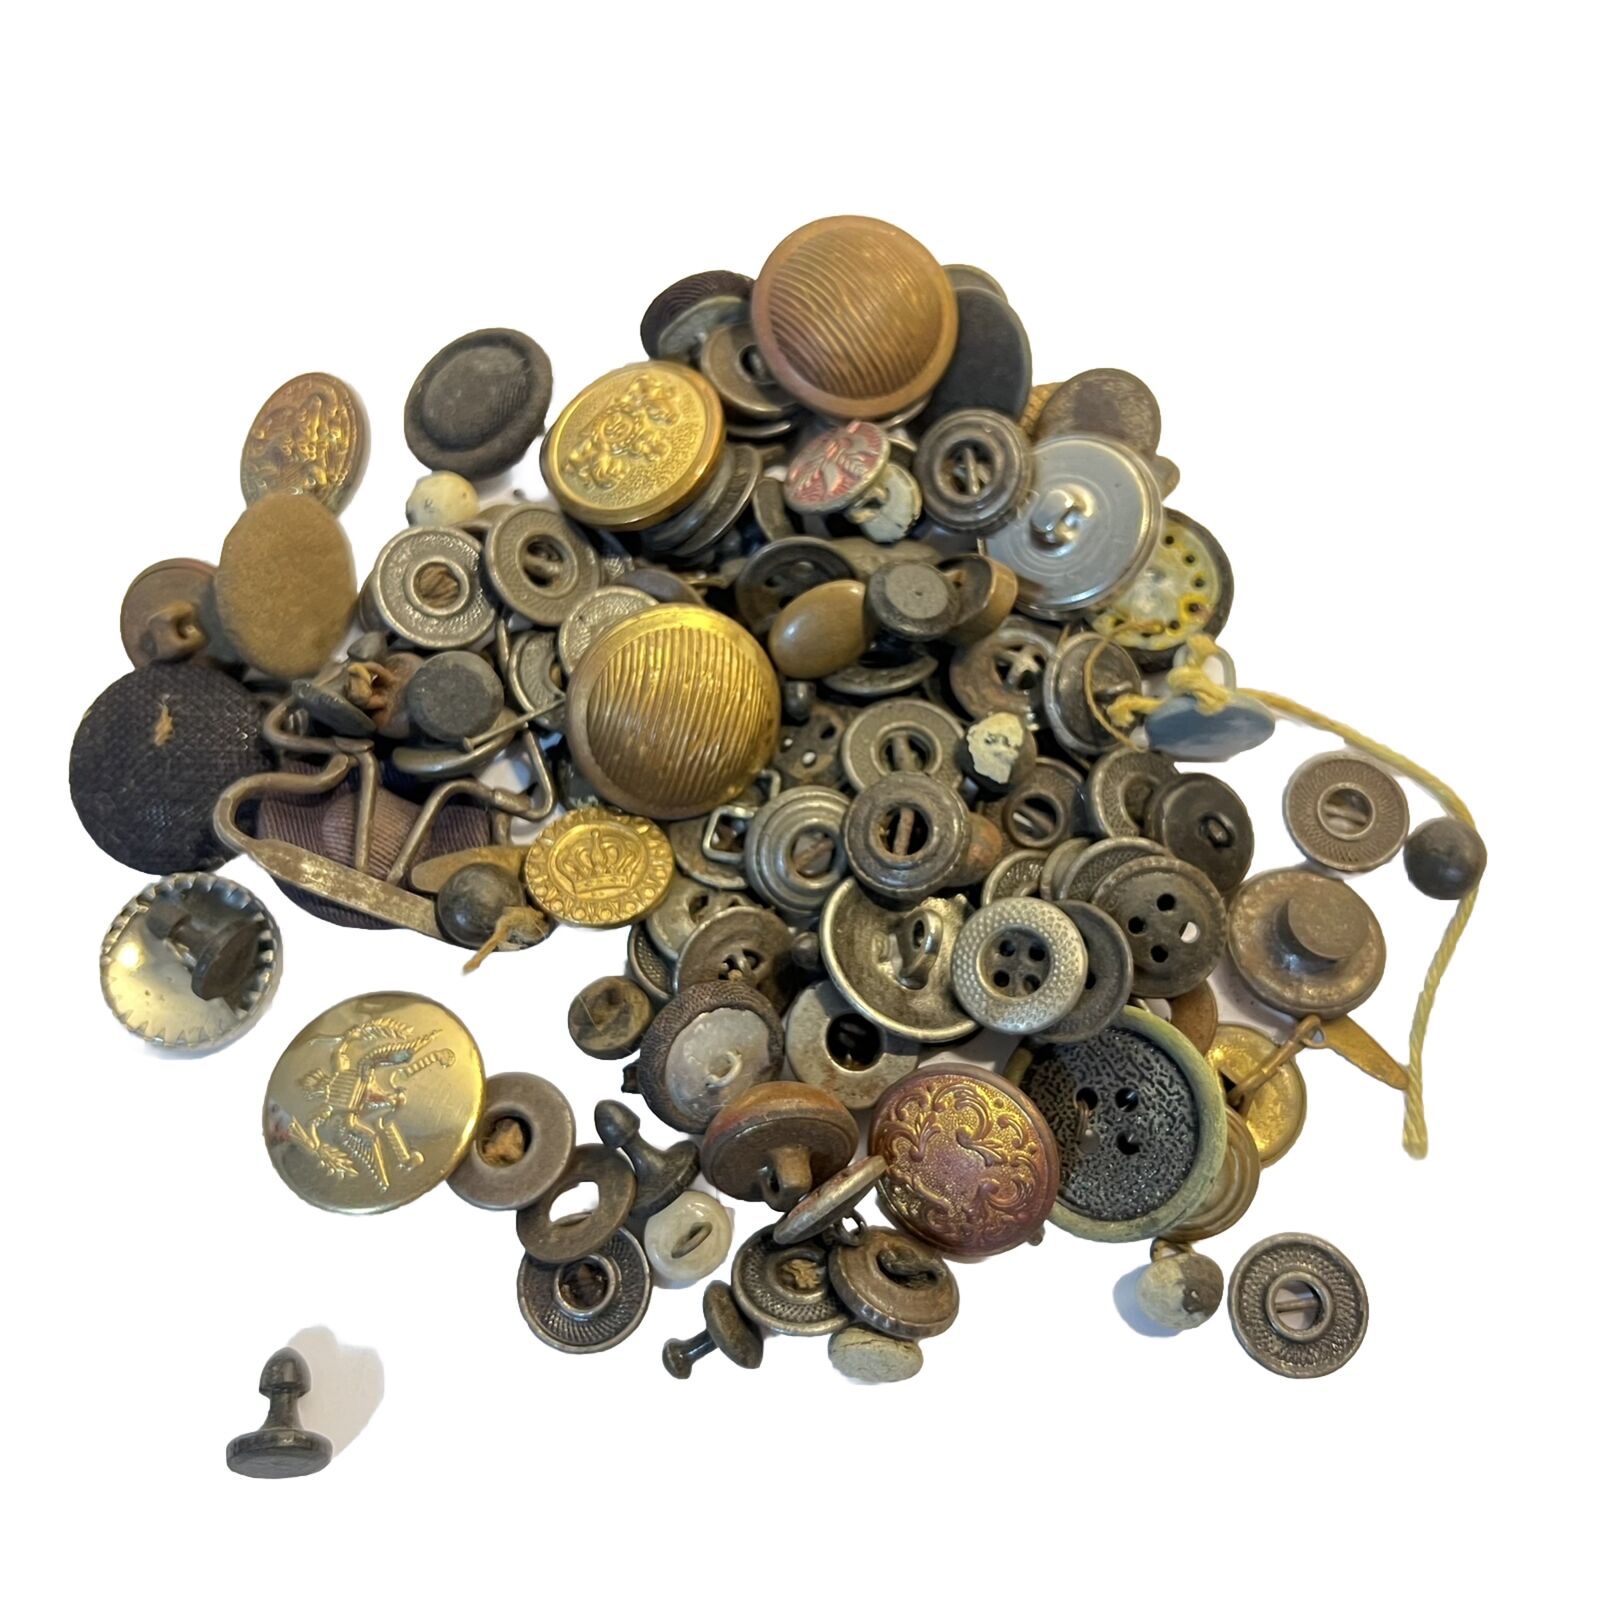 Mostly Metal Vintage Buttons 50 Plus  Craft Collectible Estate Find